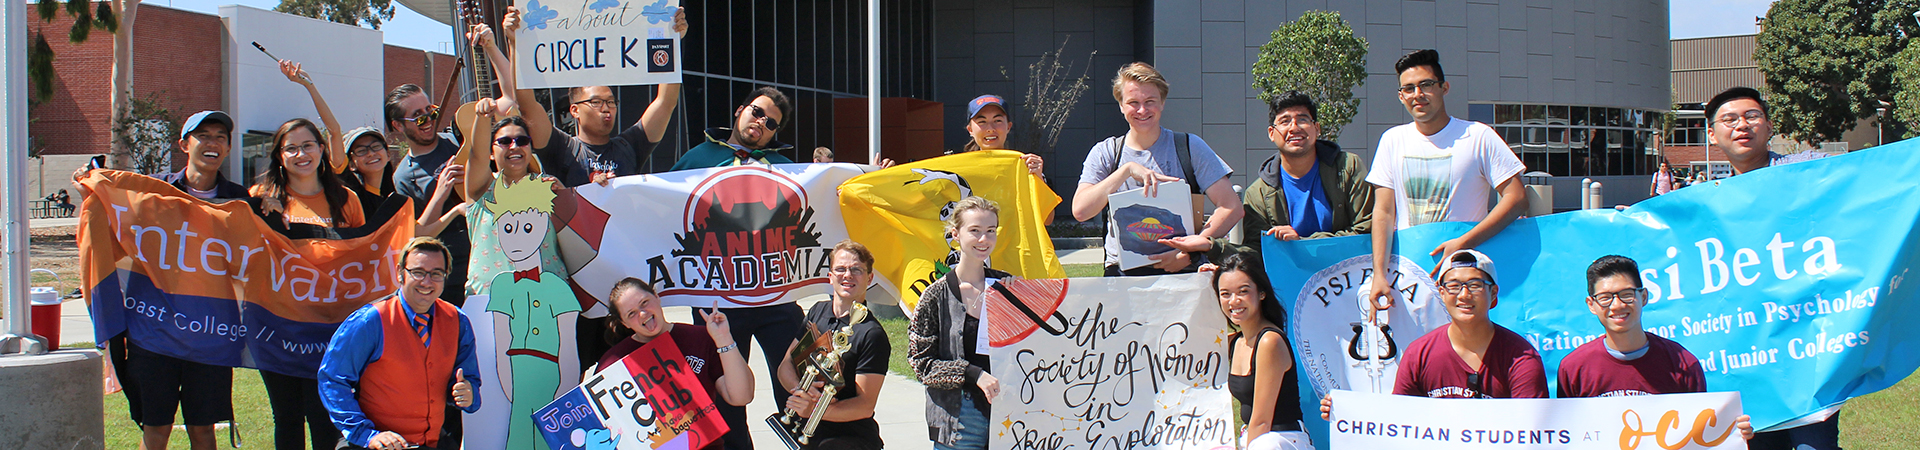 A group of students from various student clubs holding banners